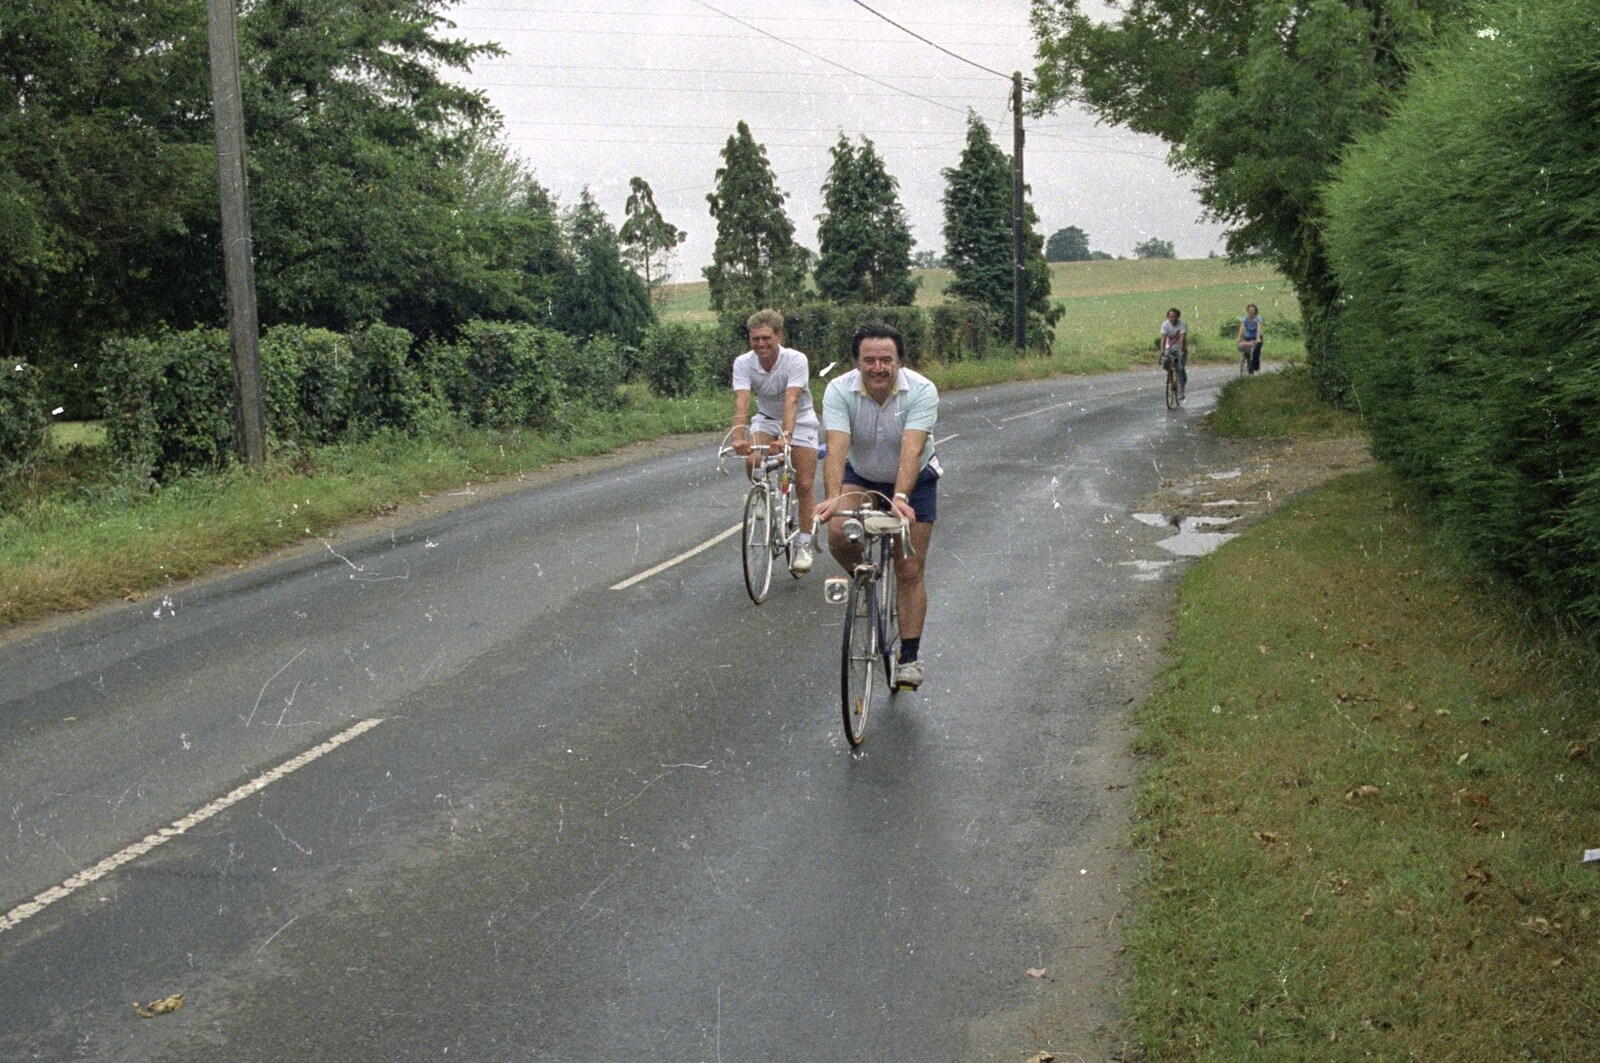 Corky speeds down Denmark Hill from A Bike Ride to Redgrave, Suffolk - 11th August 1990